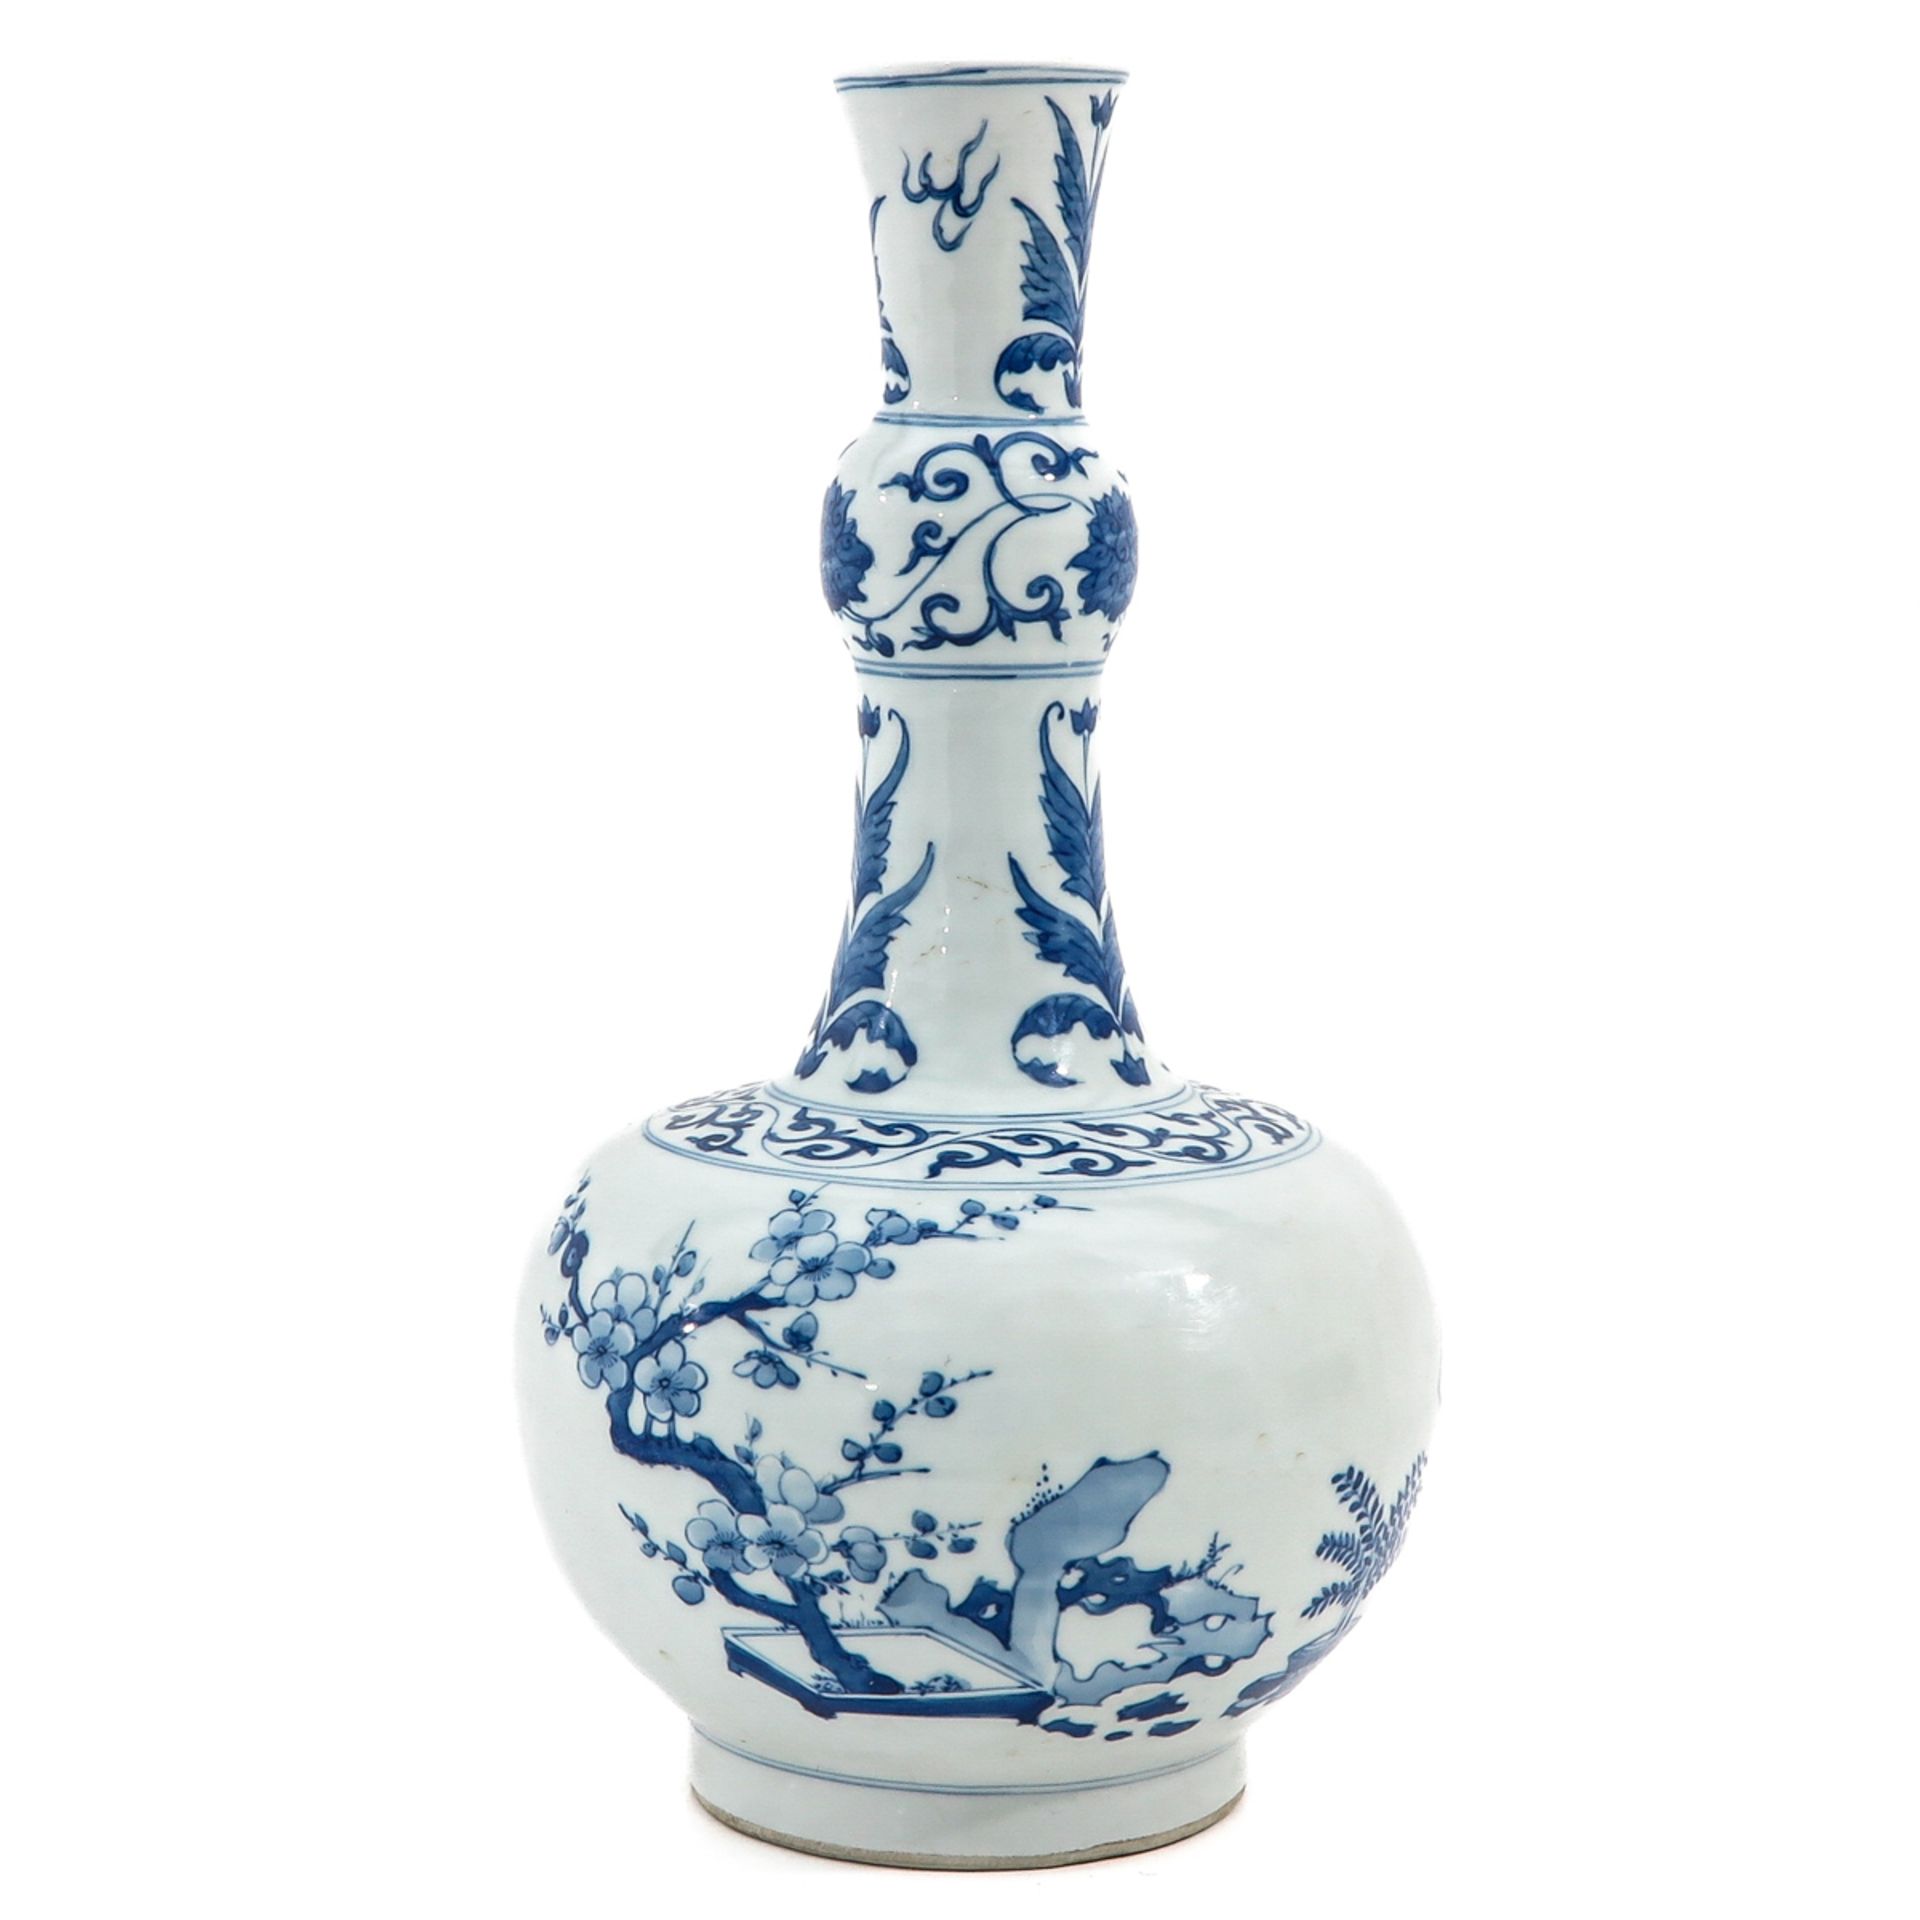 A Blue and White Gourd Vase - Image 4 of 9